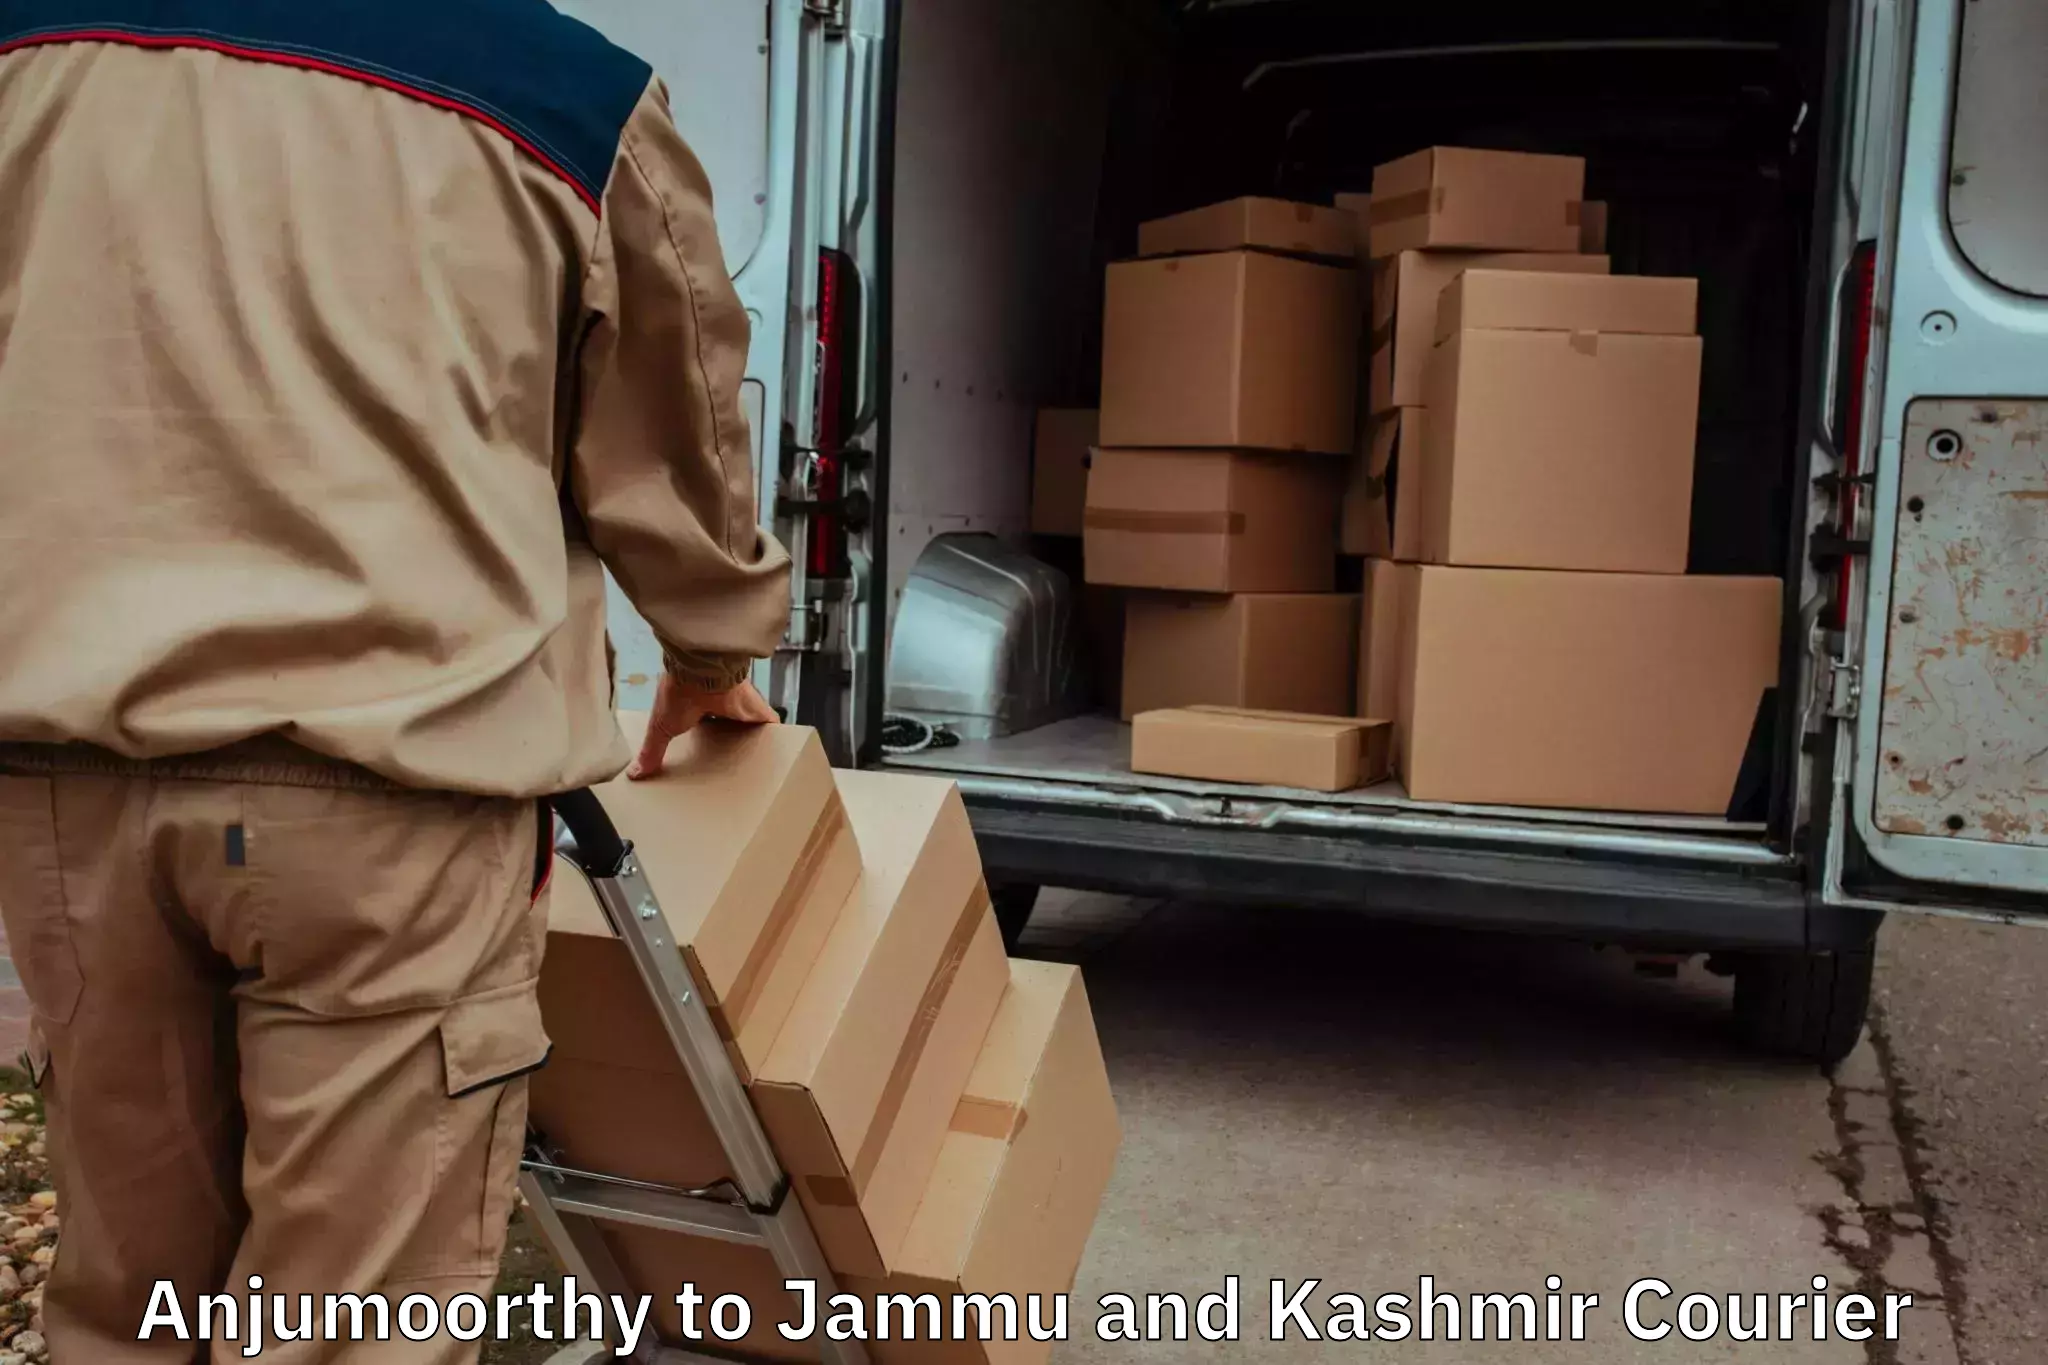 Efficient relocation services in Anjumoorthy to Pulwama